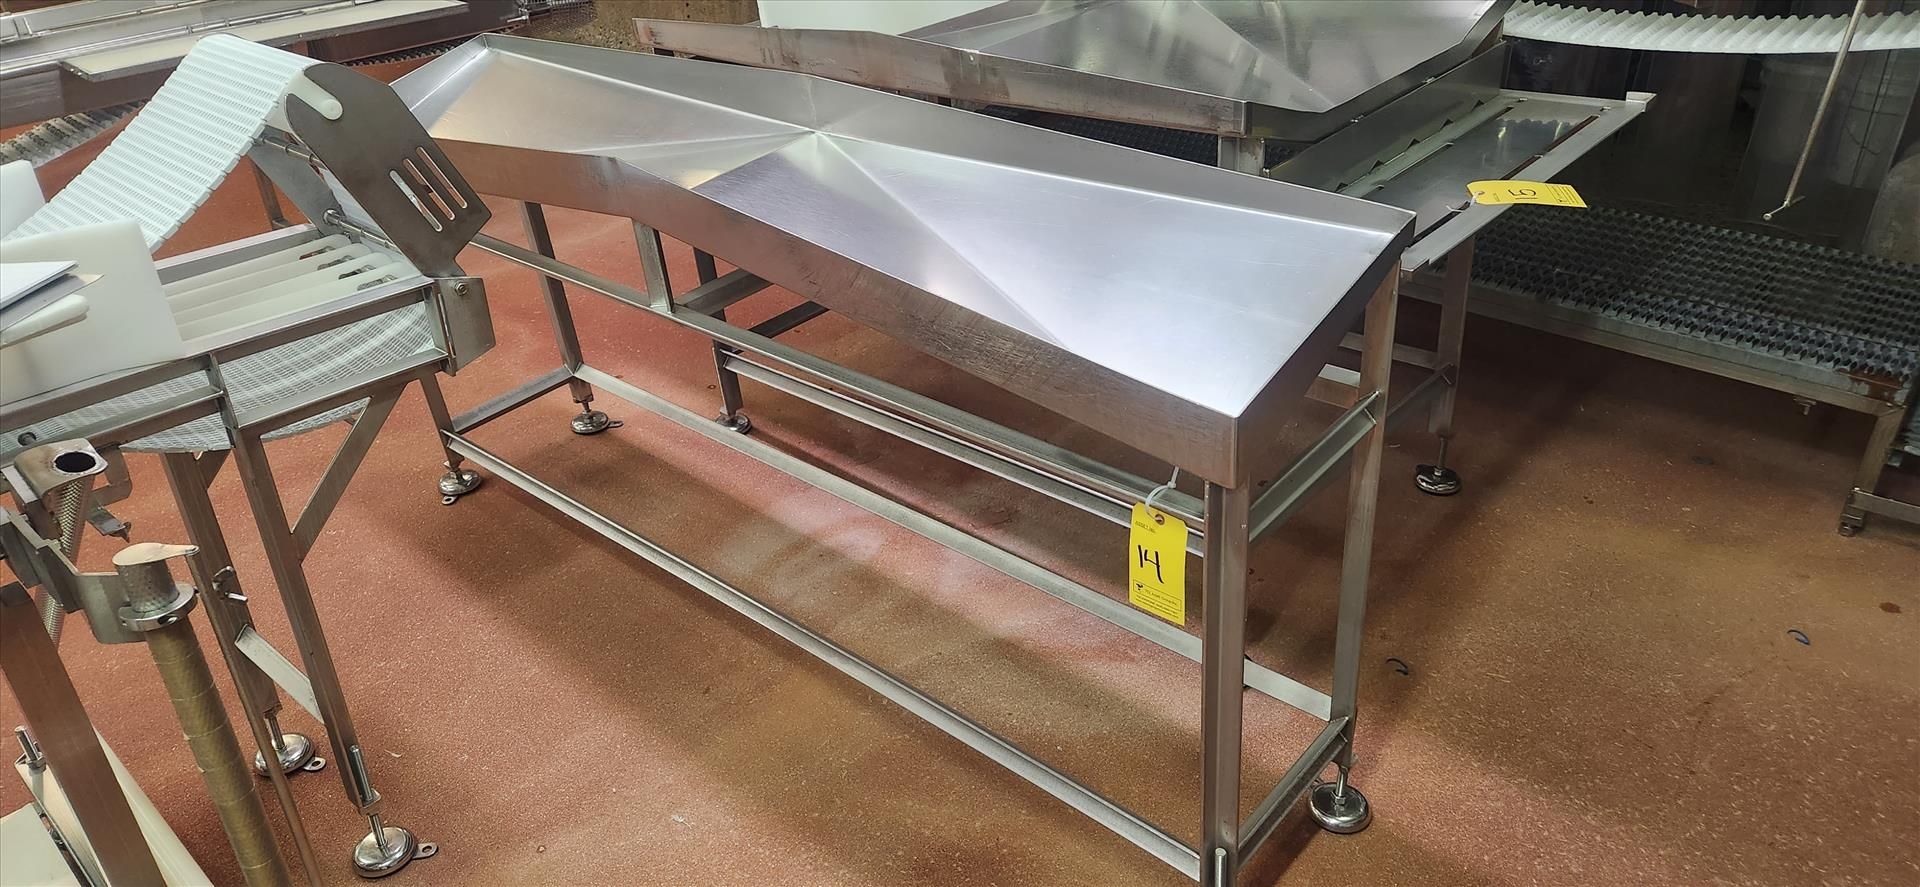 sorting station, stainless steel, approx. 36 in. x 7 ft. [Loc. Whole Bird]